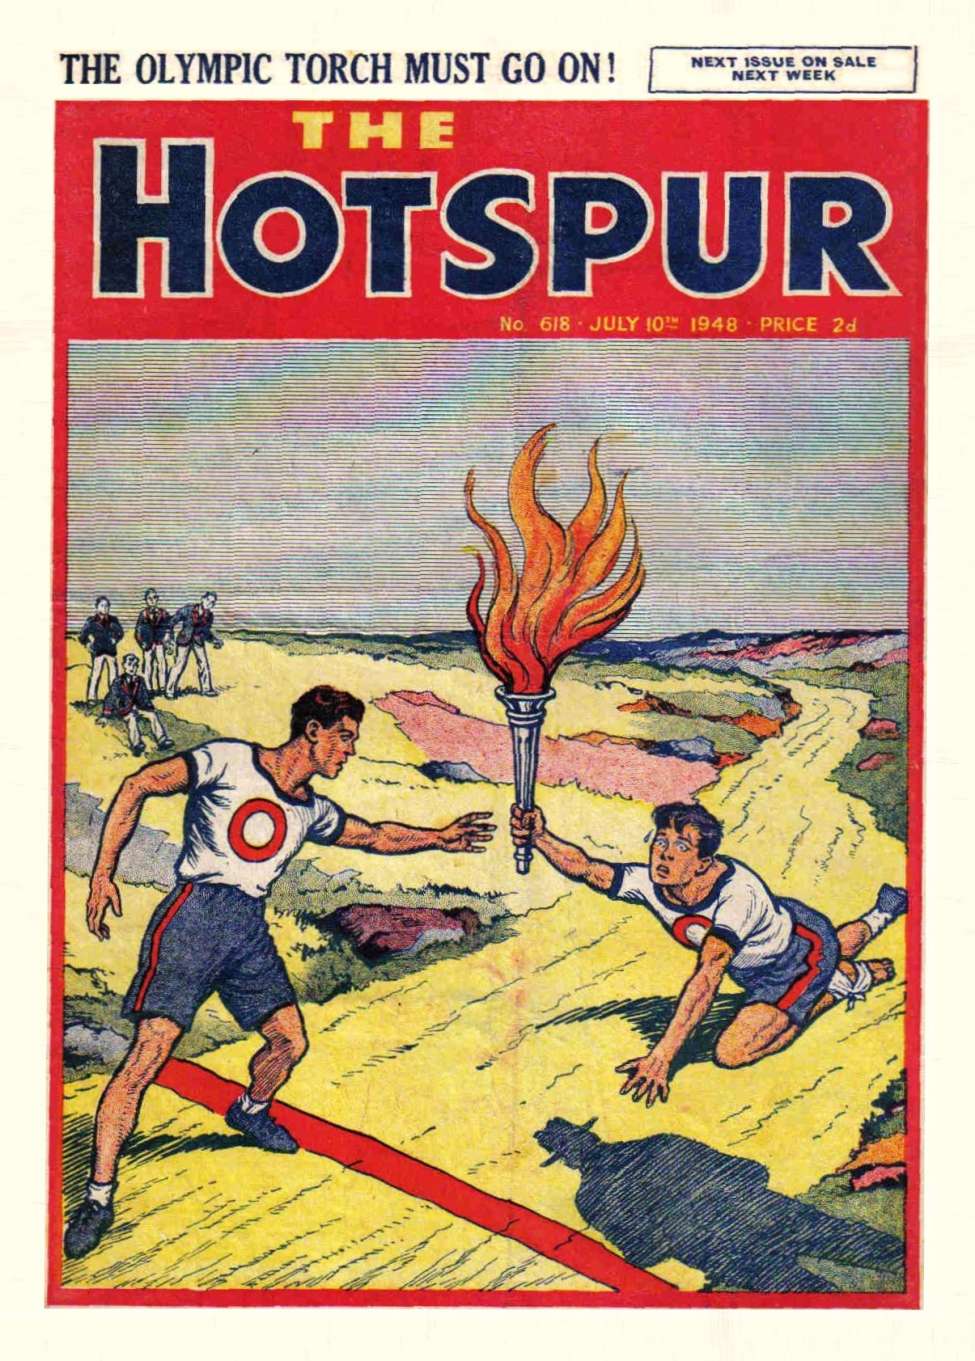 Comic Book Cover For The Hotspur 618